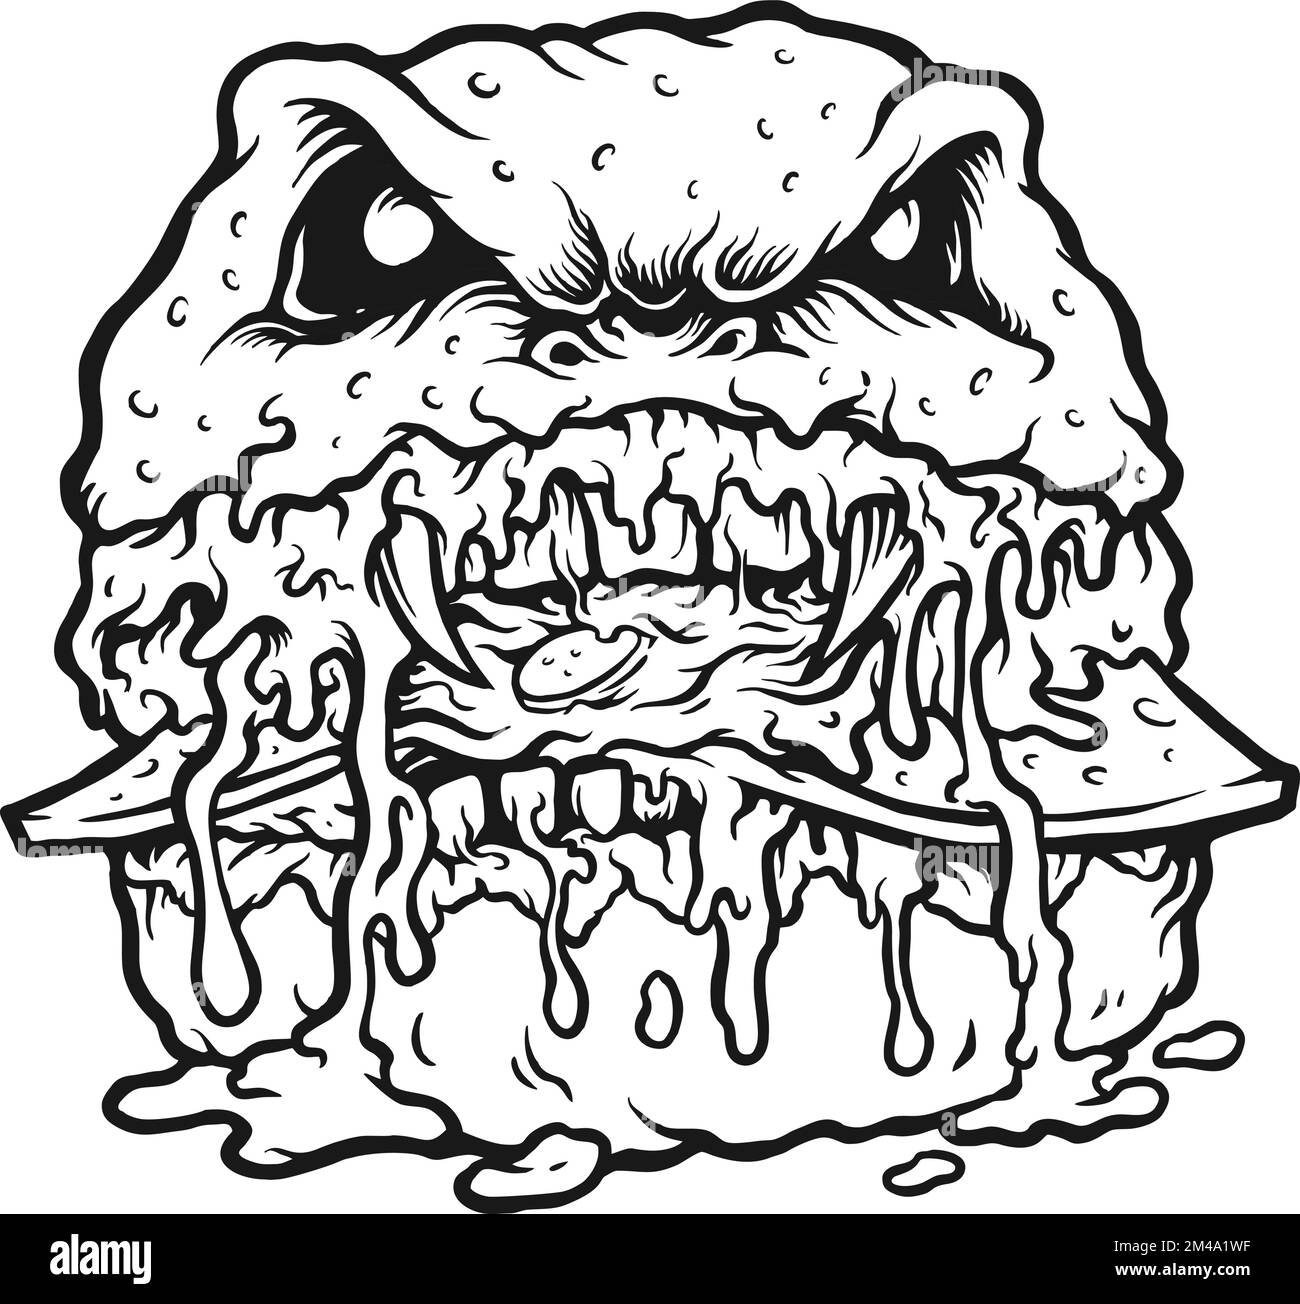 Zombie Food Hamburger Silhouette vector illustrations for your work logo, merchandise t-shirt, stickers and label designs, poster, greeting cards Stock Vector